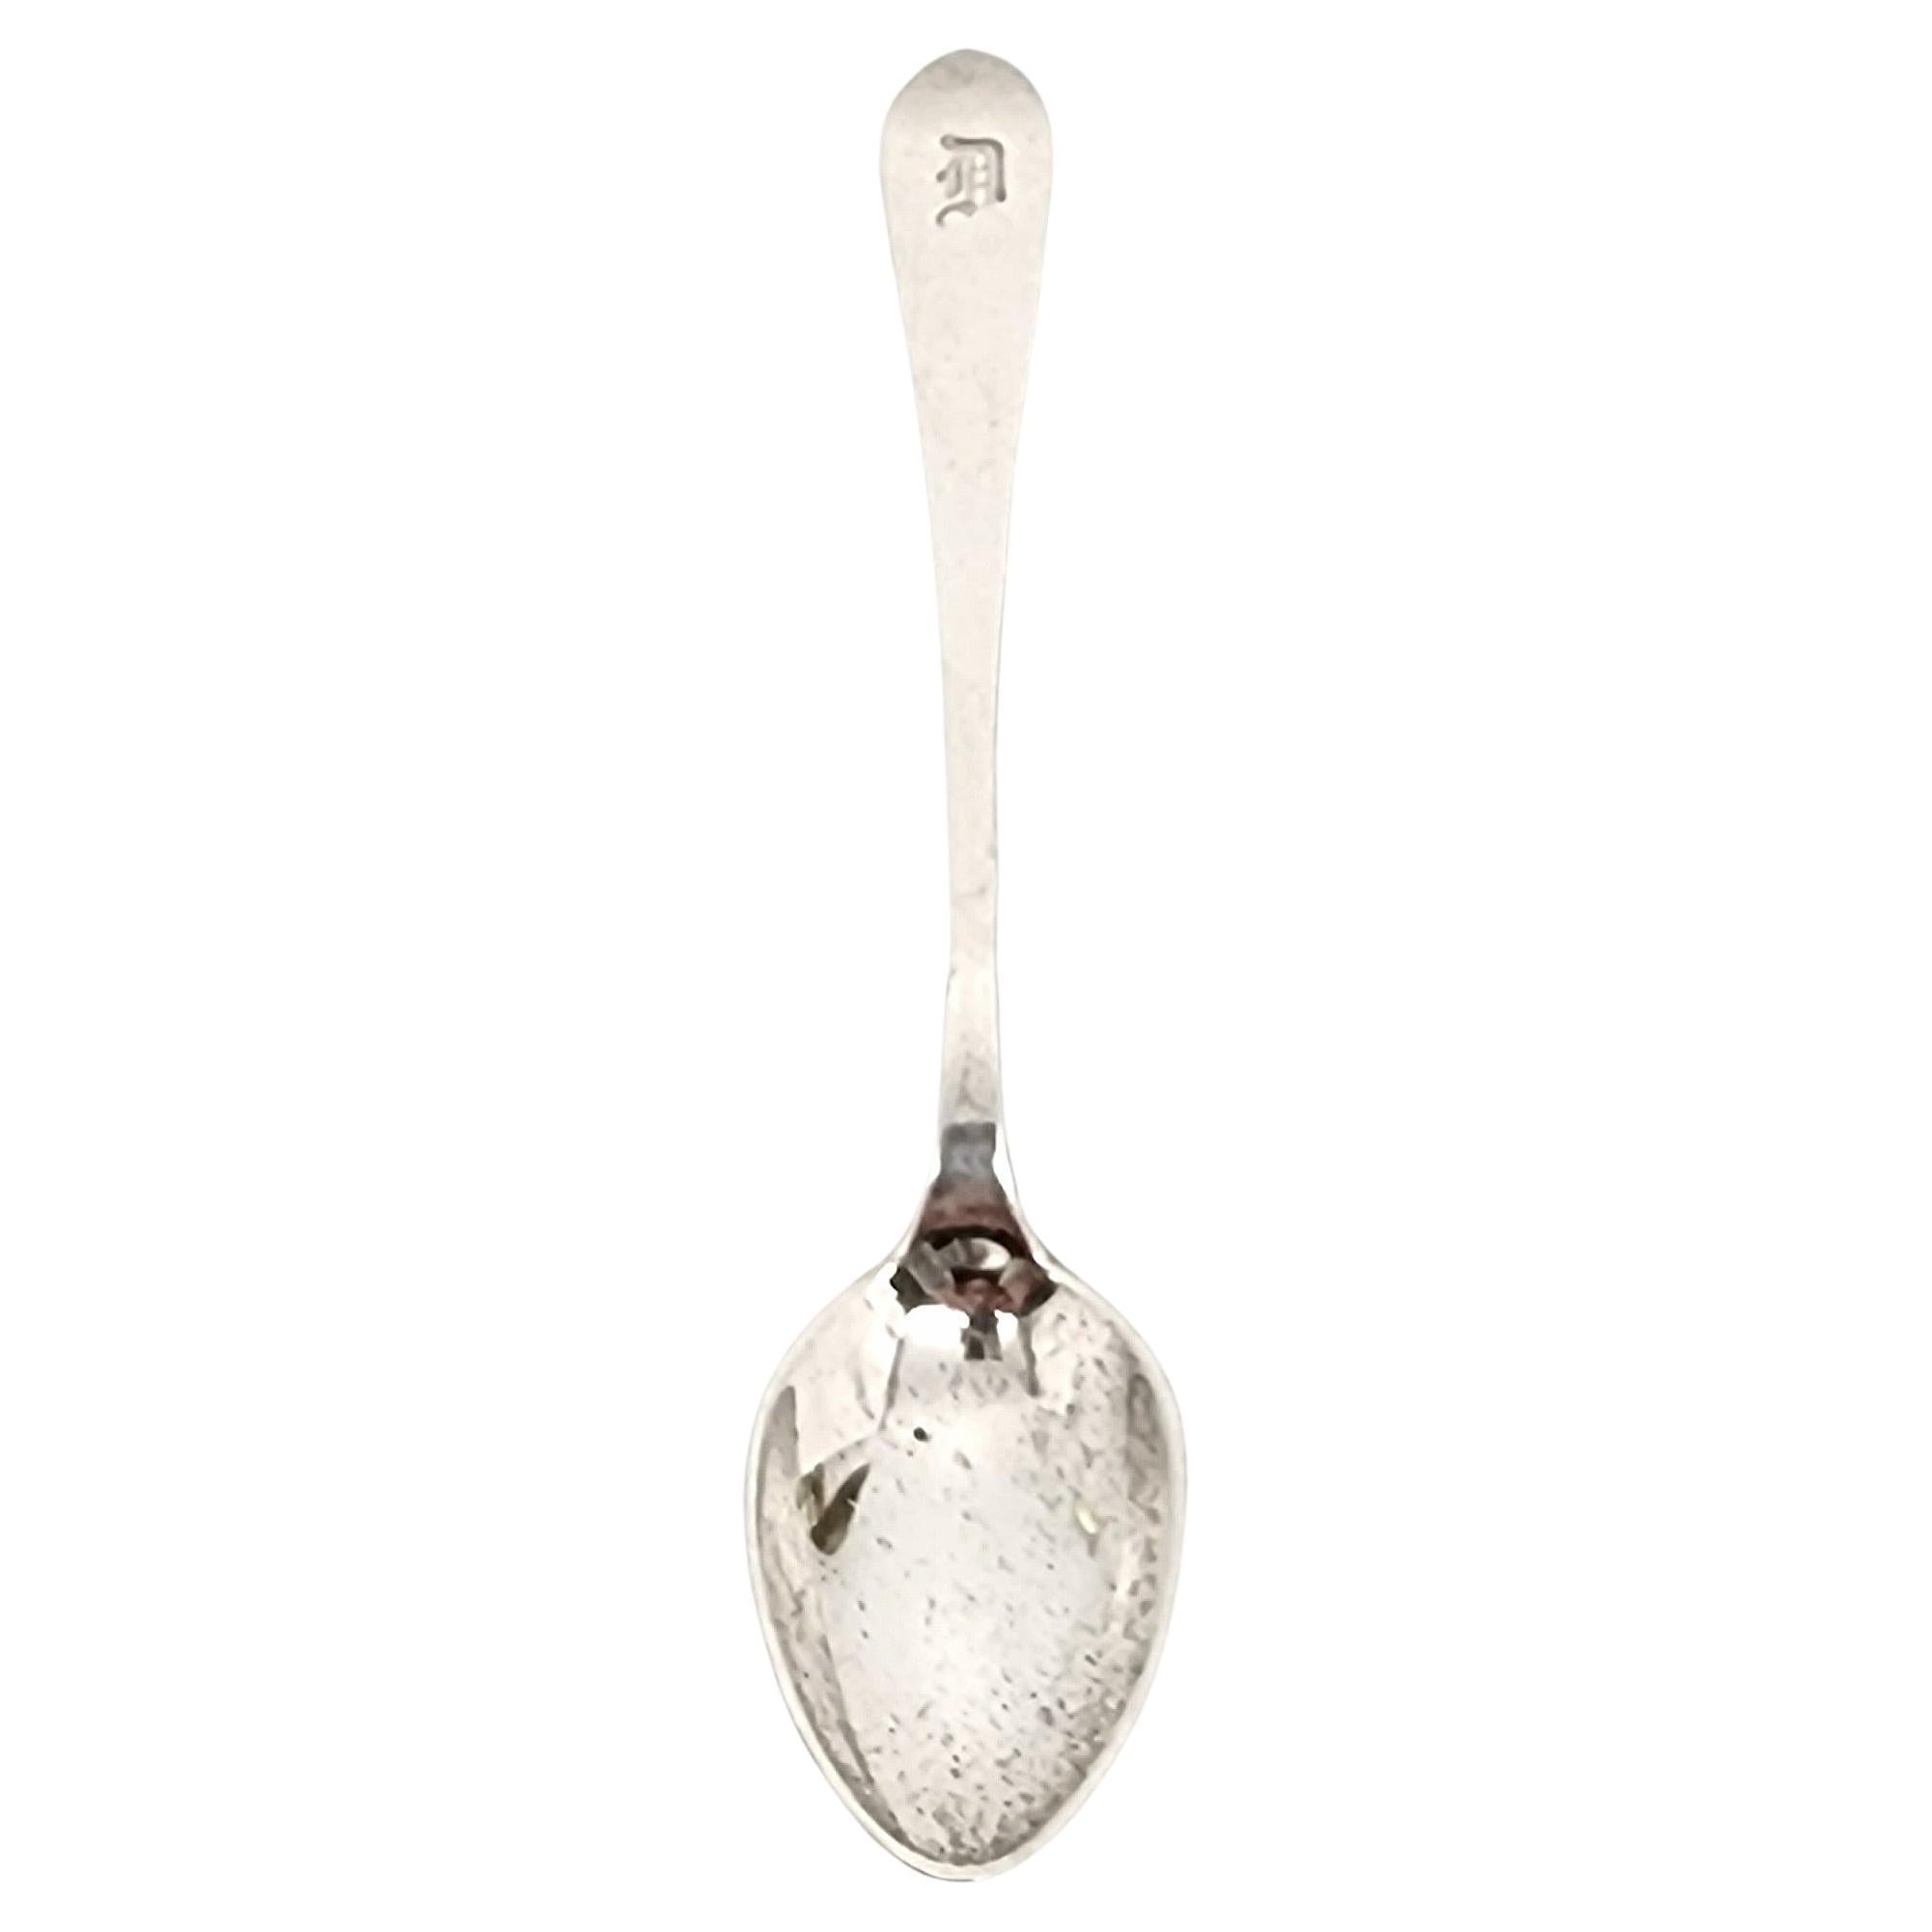 Tiffany & Co Faneuil Sterling Silver Demitasse Spoon with Monogram #13070 For Sale